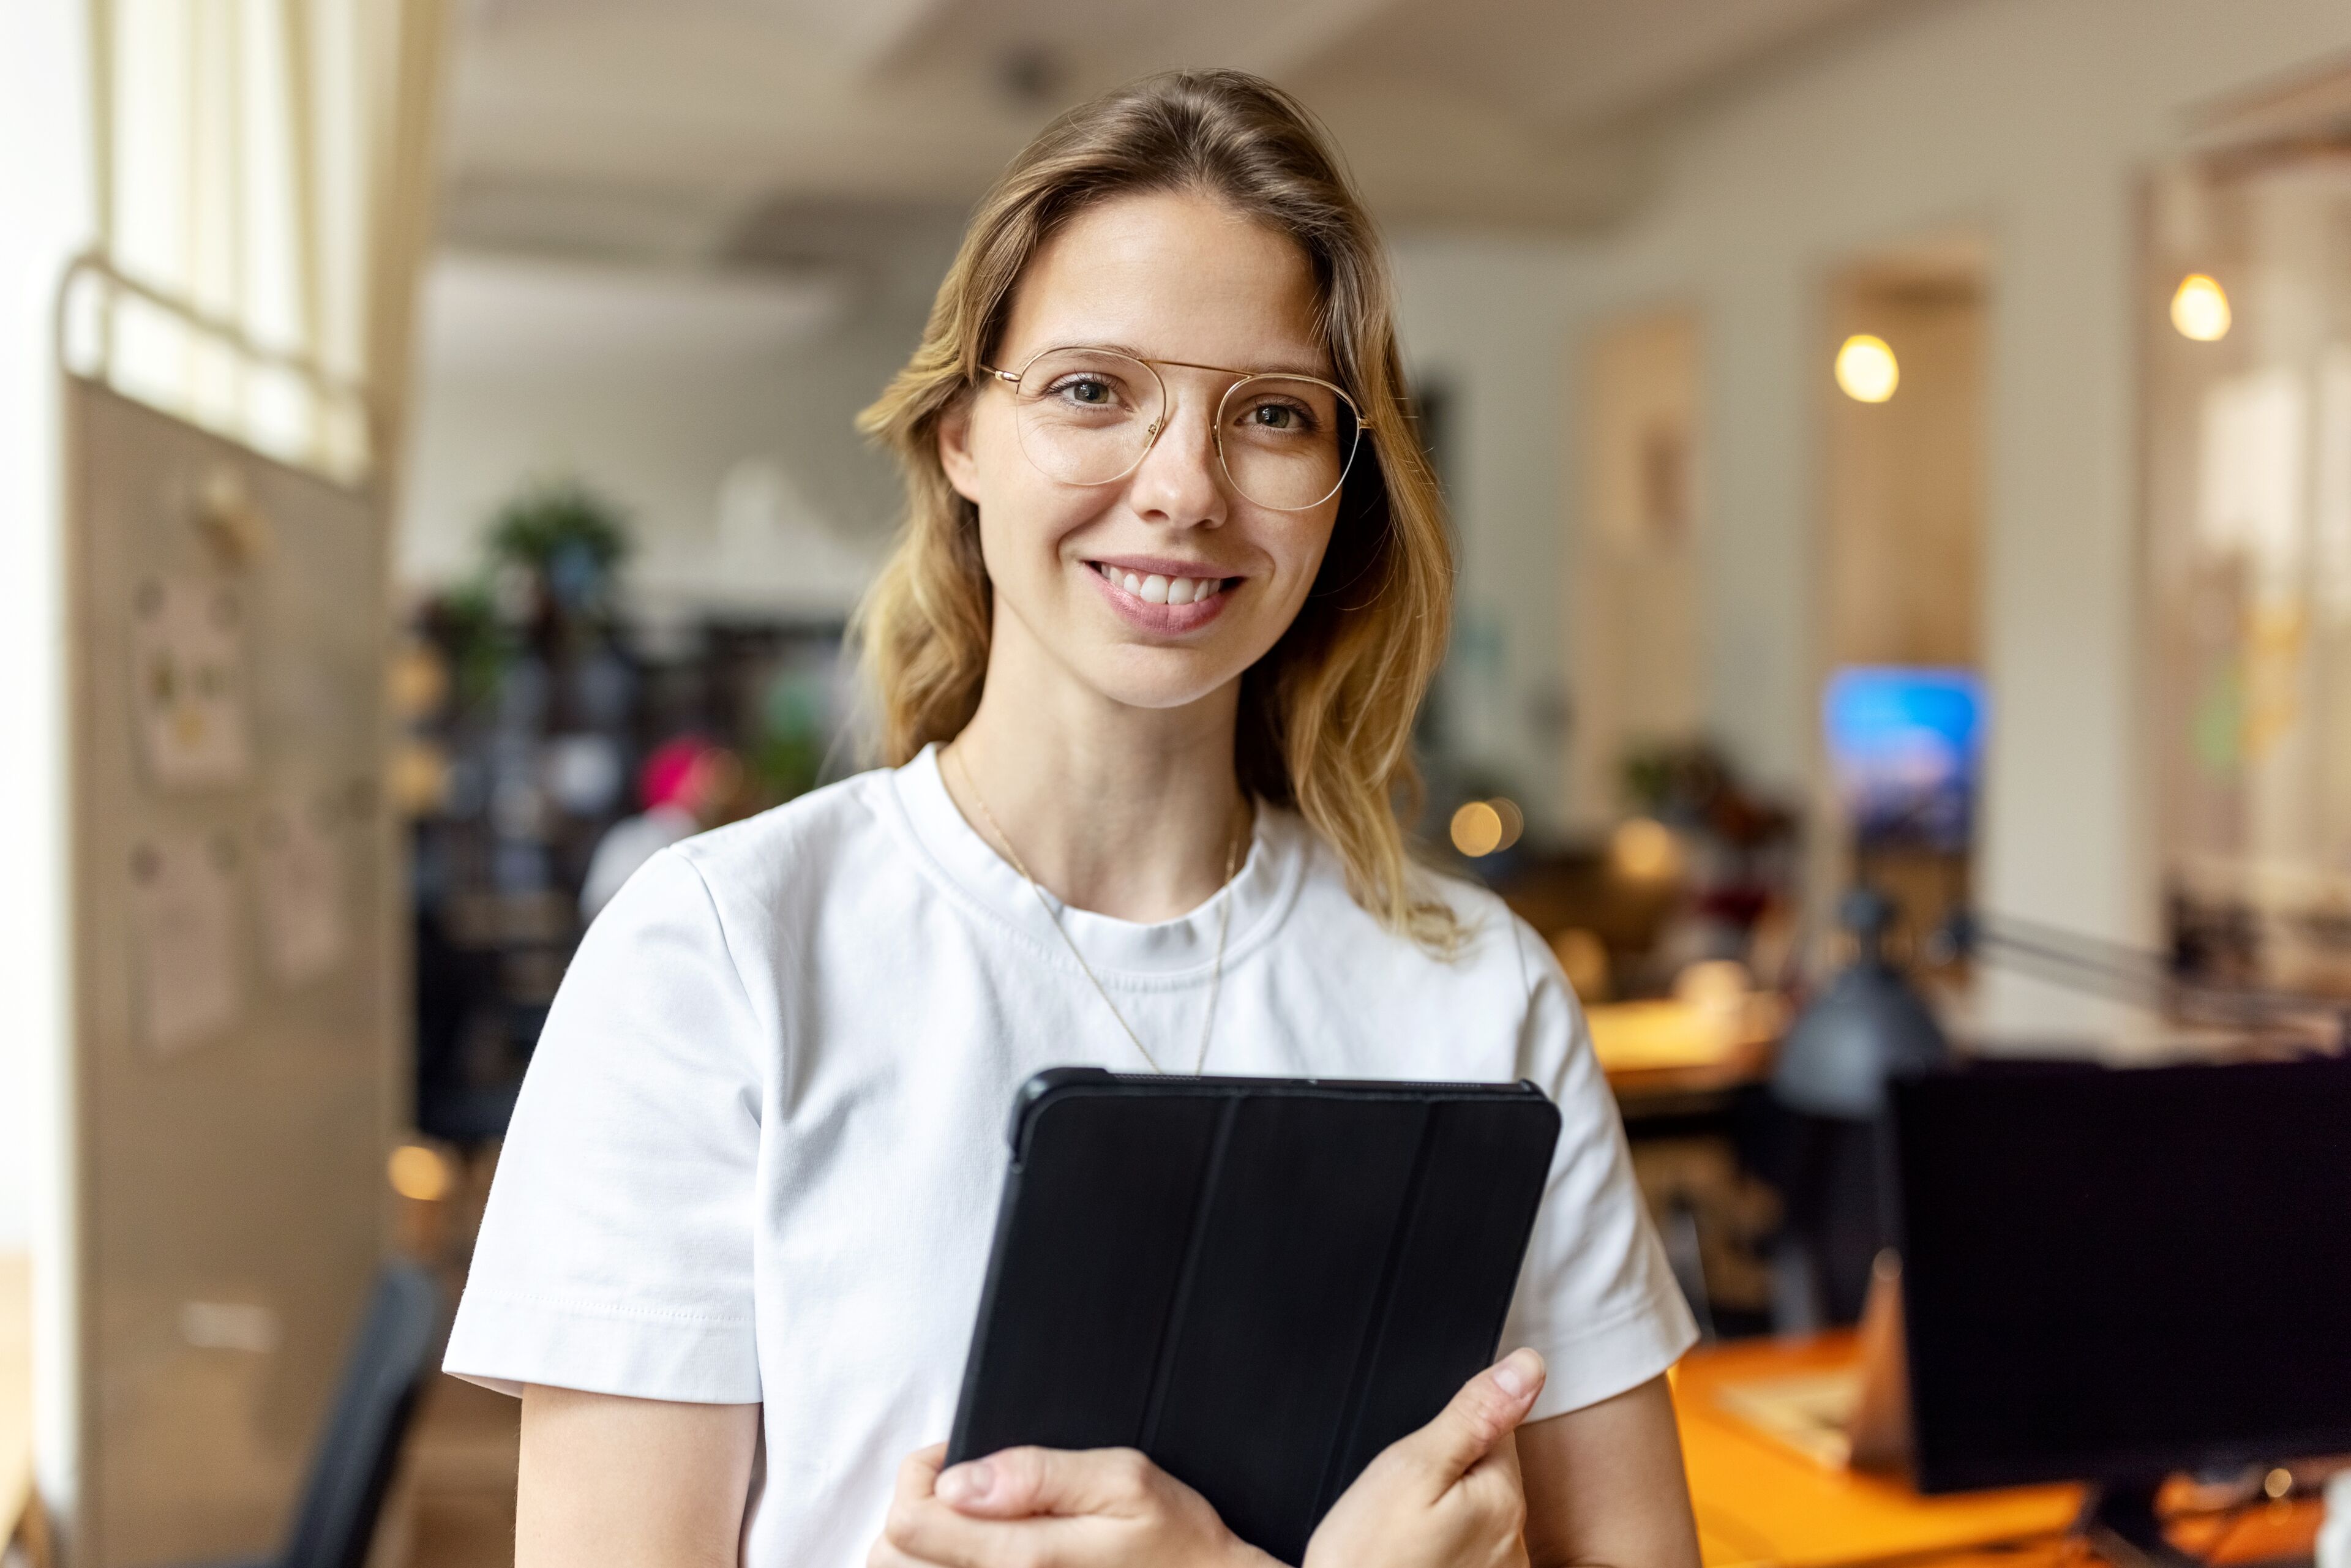 Portrait of a happy young businesswoman in office. Female wearing casuals holding digital tablet looking at the camera.